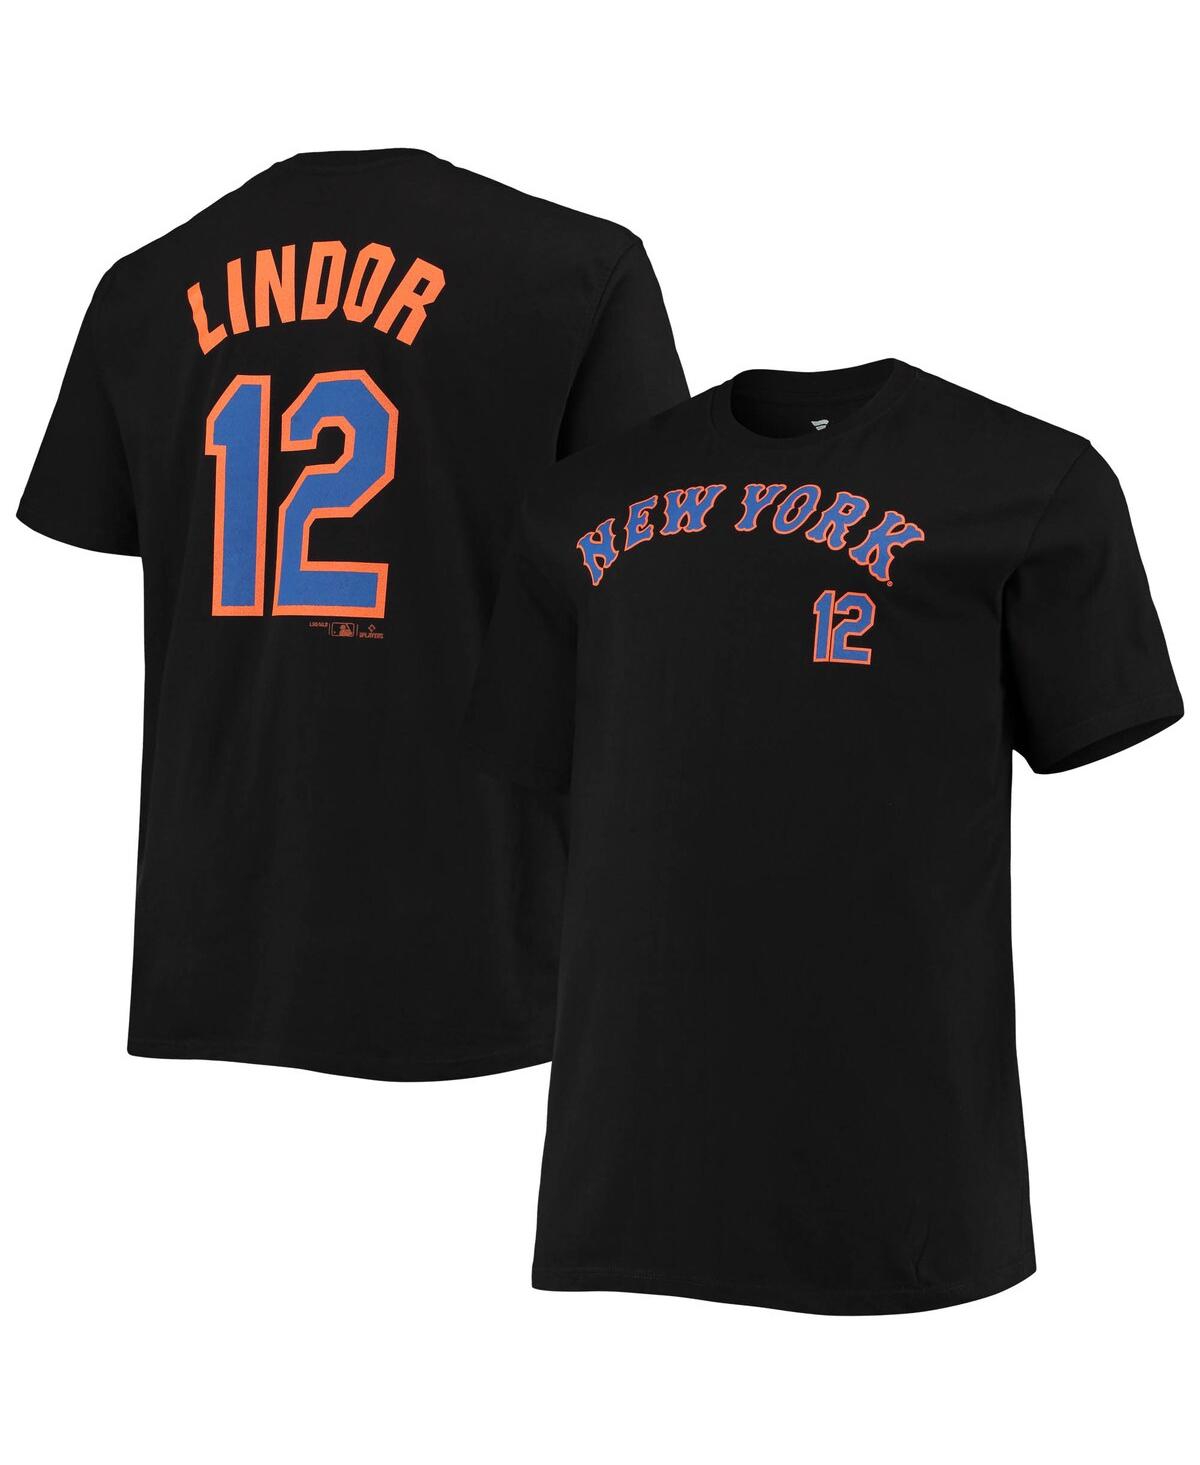 Men's Francisco Lindor Black New York Mets Big and Tall Name and Number T-shirt - Black